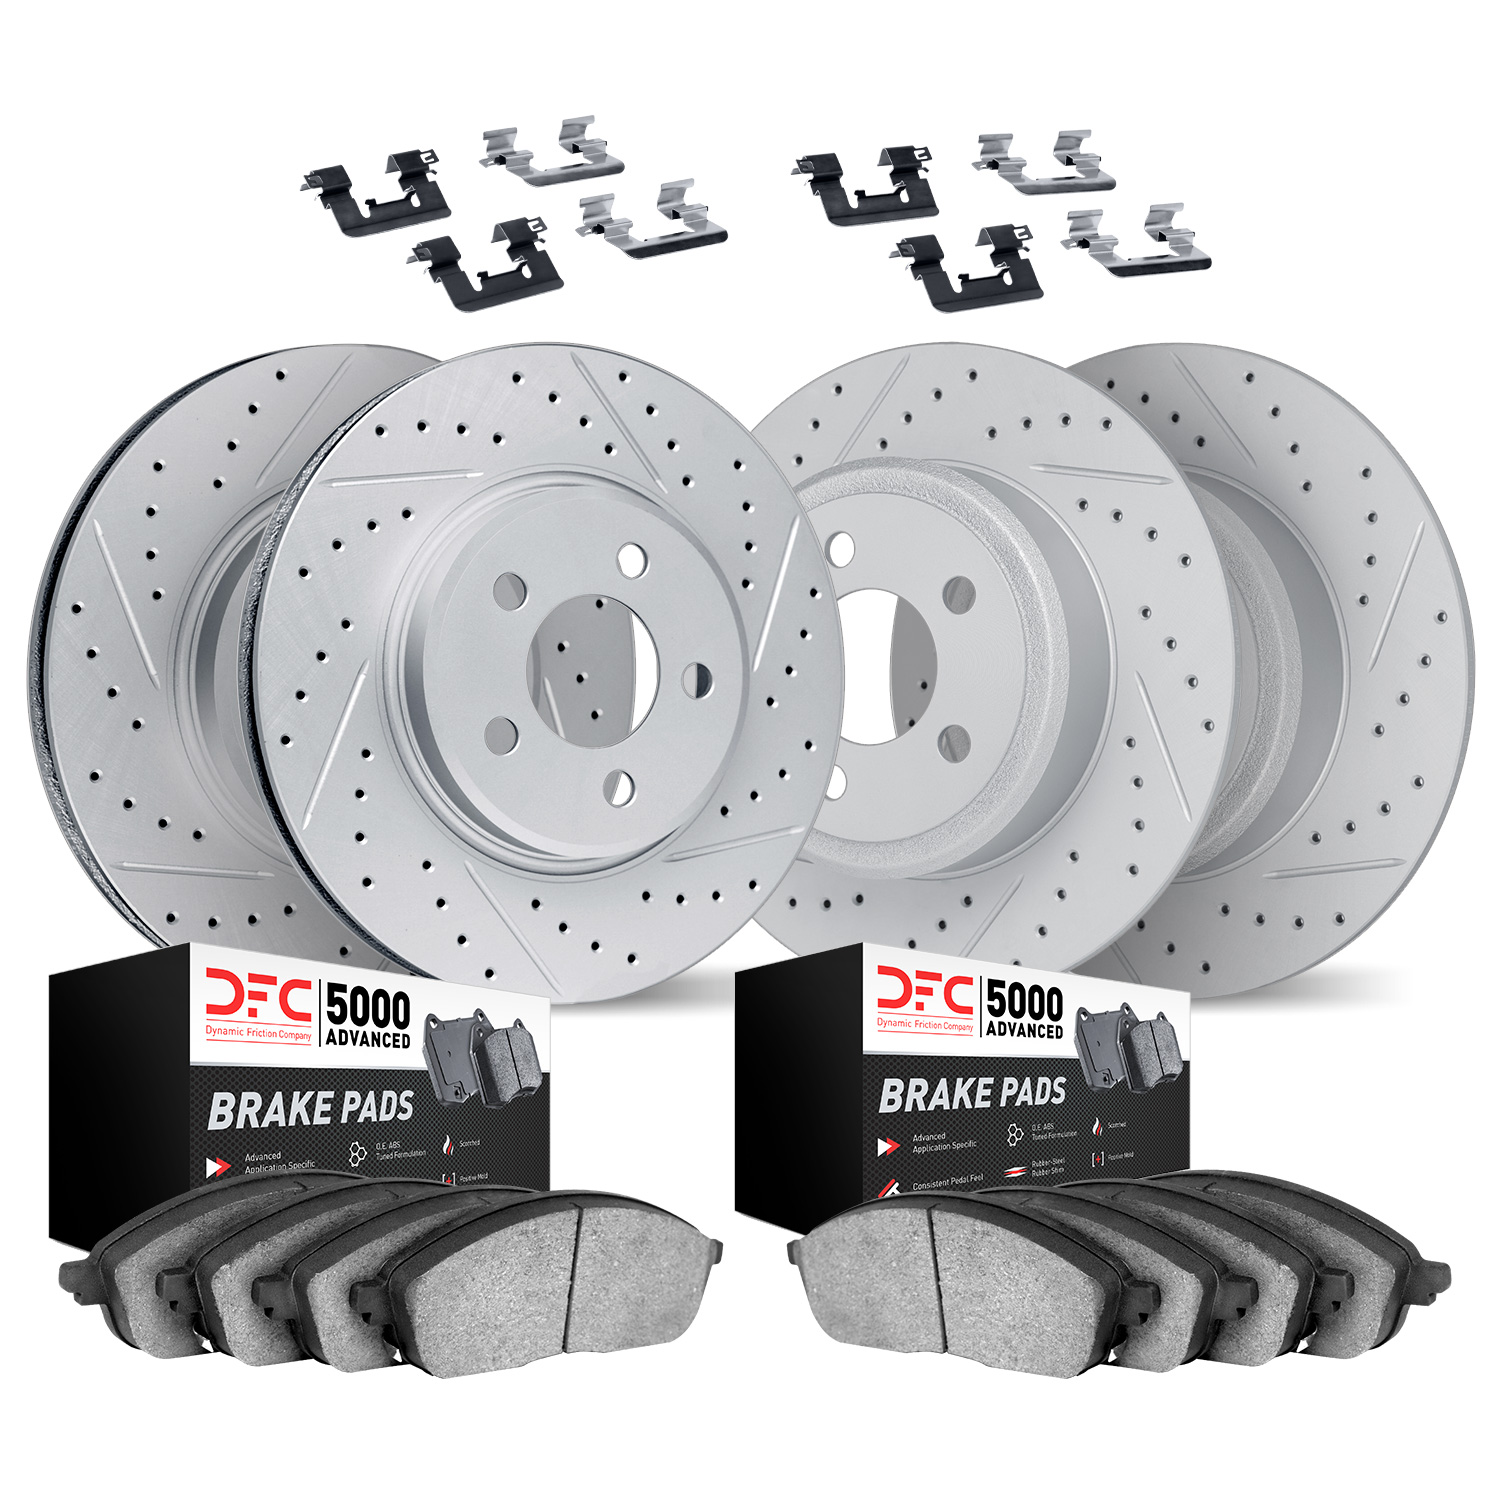 2514-11015 Geoperformance Drilled/Slotted Rotors w/5000 Advanced Brake Pads Kit & Hardware, 2016-2019 Land Rover, Position: Fron